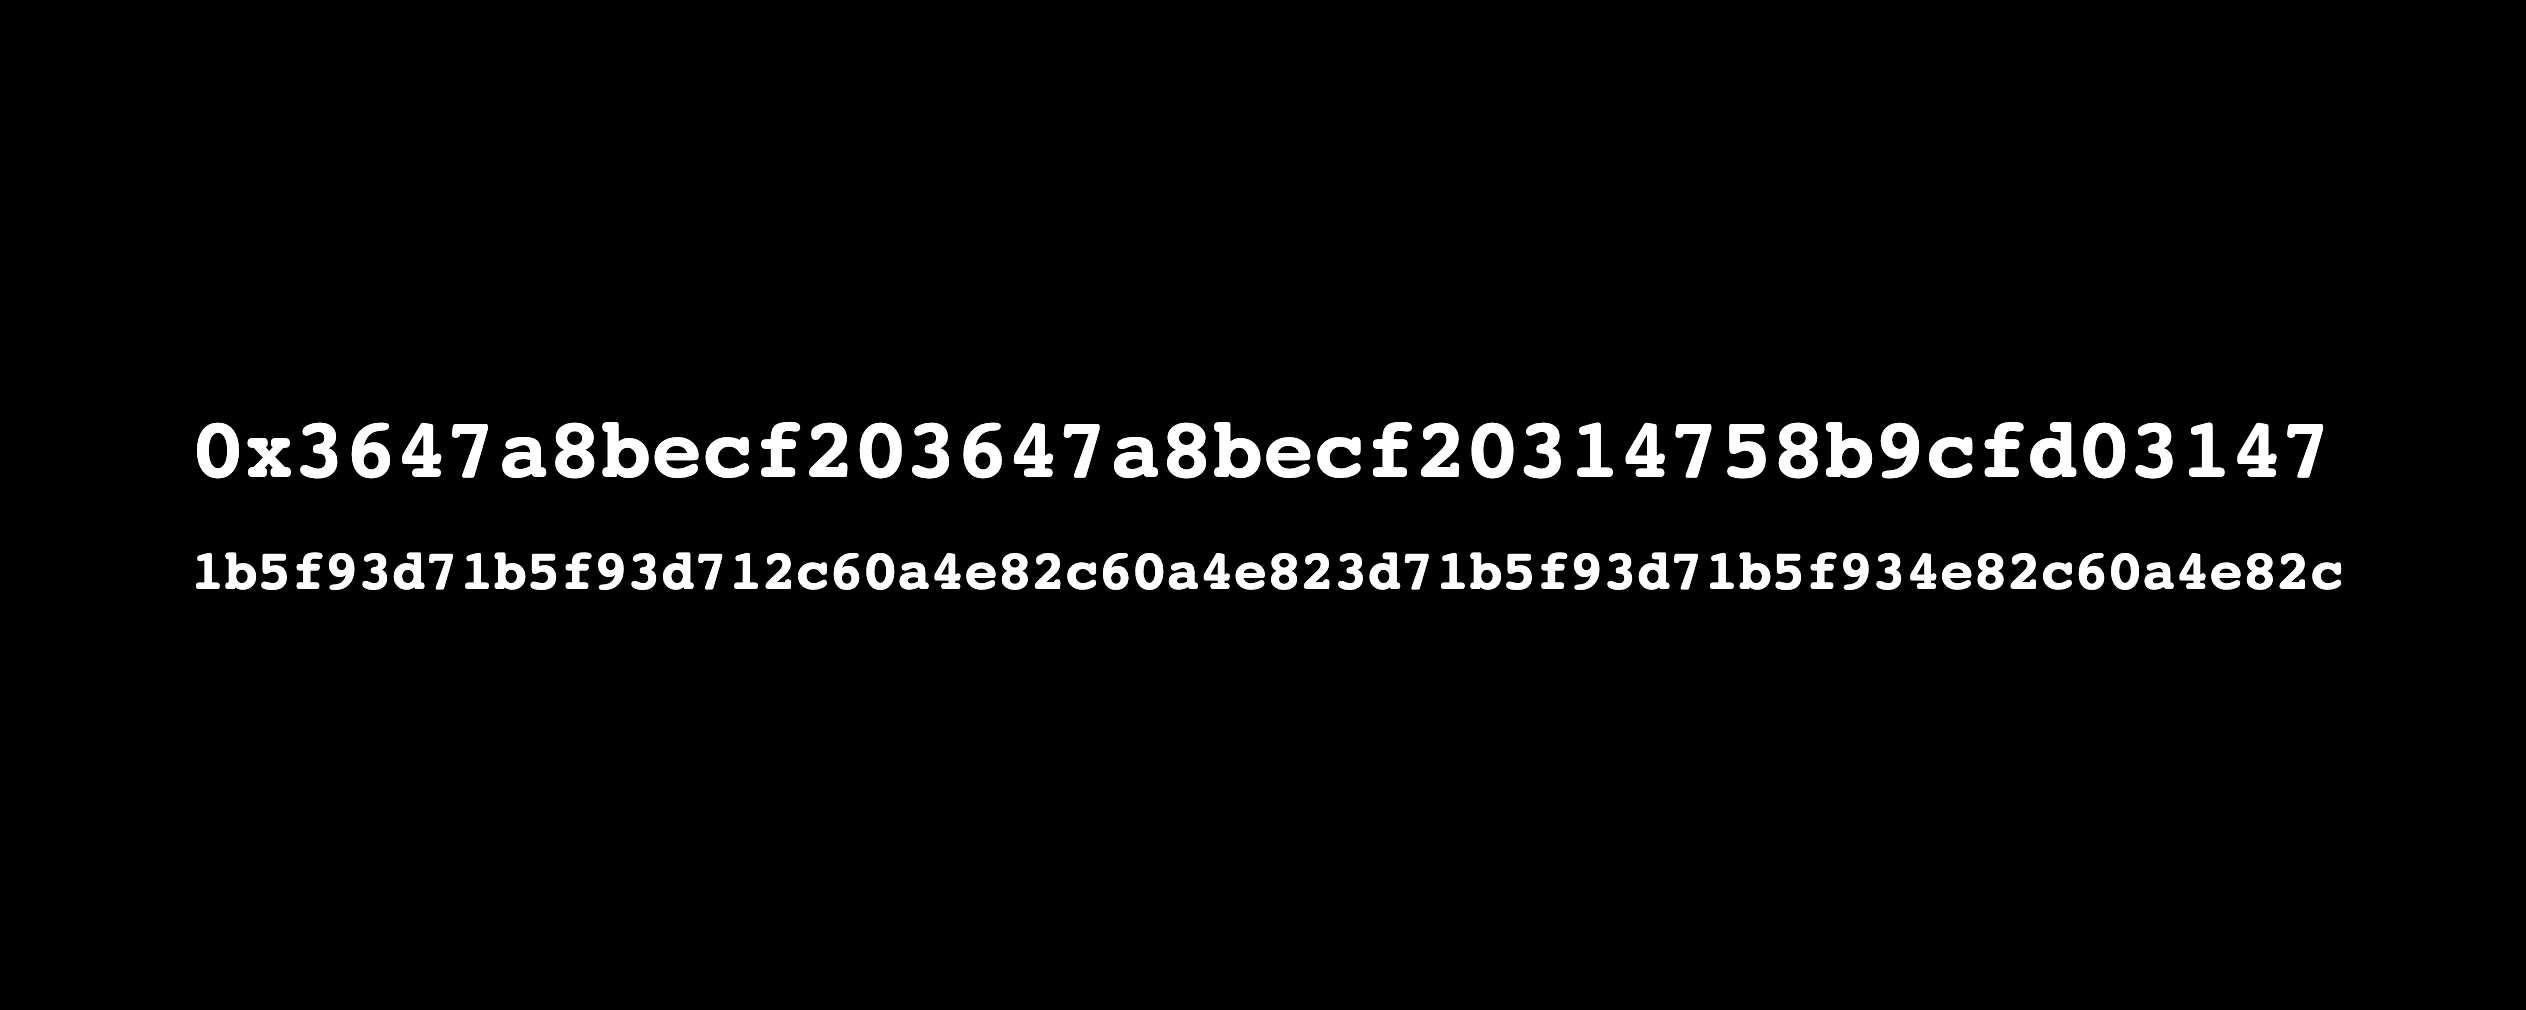 Two lines of randomized, white, hexadecimal characters centered on a black background. The first line is 40 characters long and reads: 0x3647a8becf203647a8becf2031475869cfd03147. The second line is 64 characters long and reads: 1b5f93d7165193d712c60a4e82c60a4e823d7165£93d71651934e82c60a4e82c